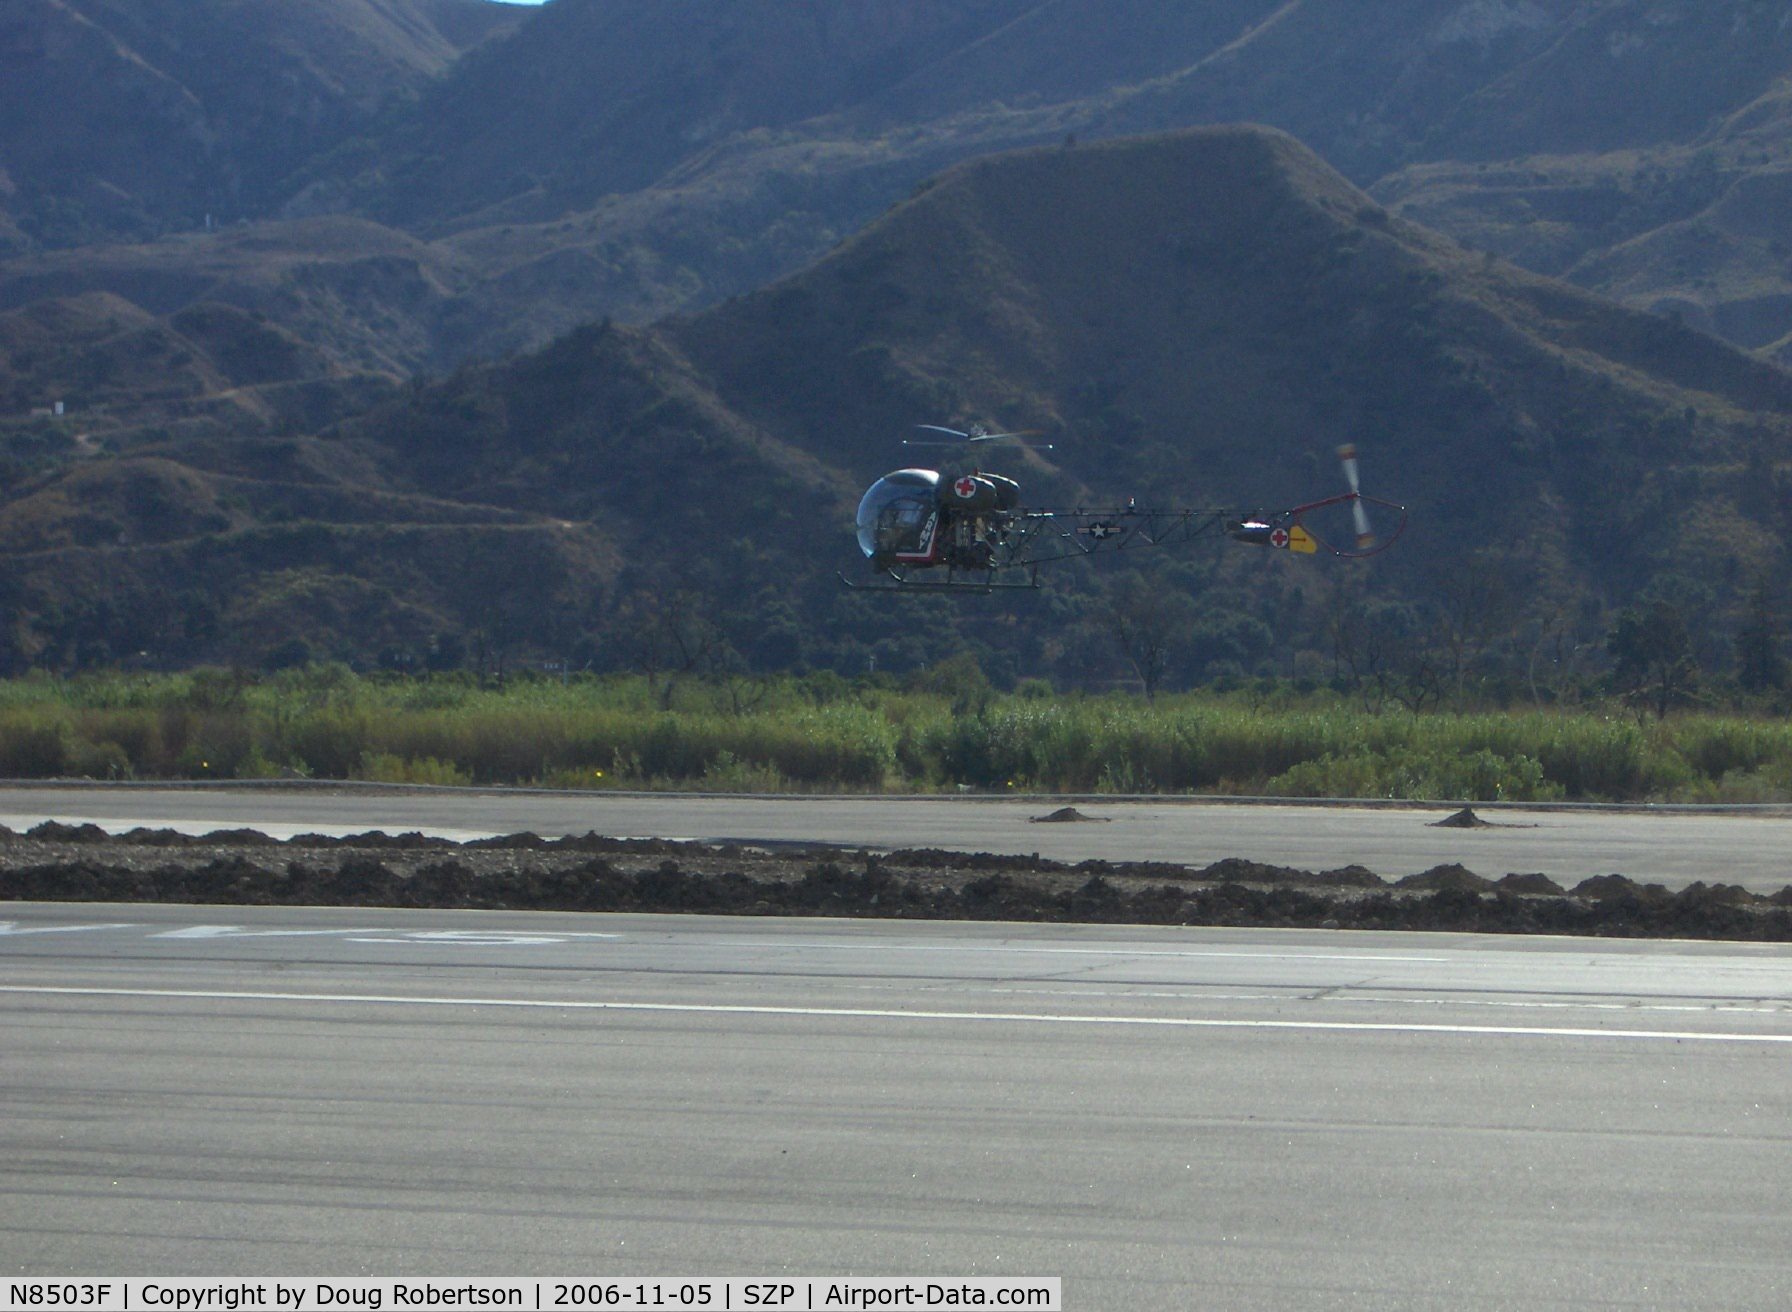 N8503F, 1965 Bell 47G-4 C/N 3350, 1965 Bell 47G-4, Lycoming VO-540 305 Hp, hover approach over SZP's Helipad for landing